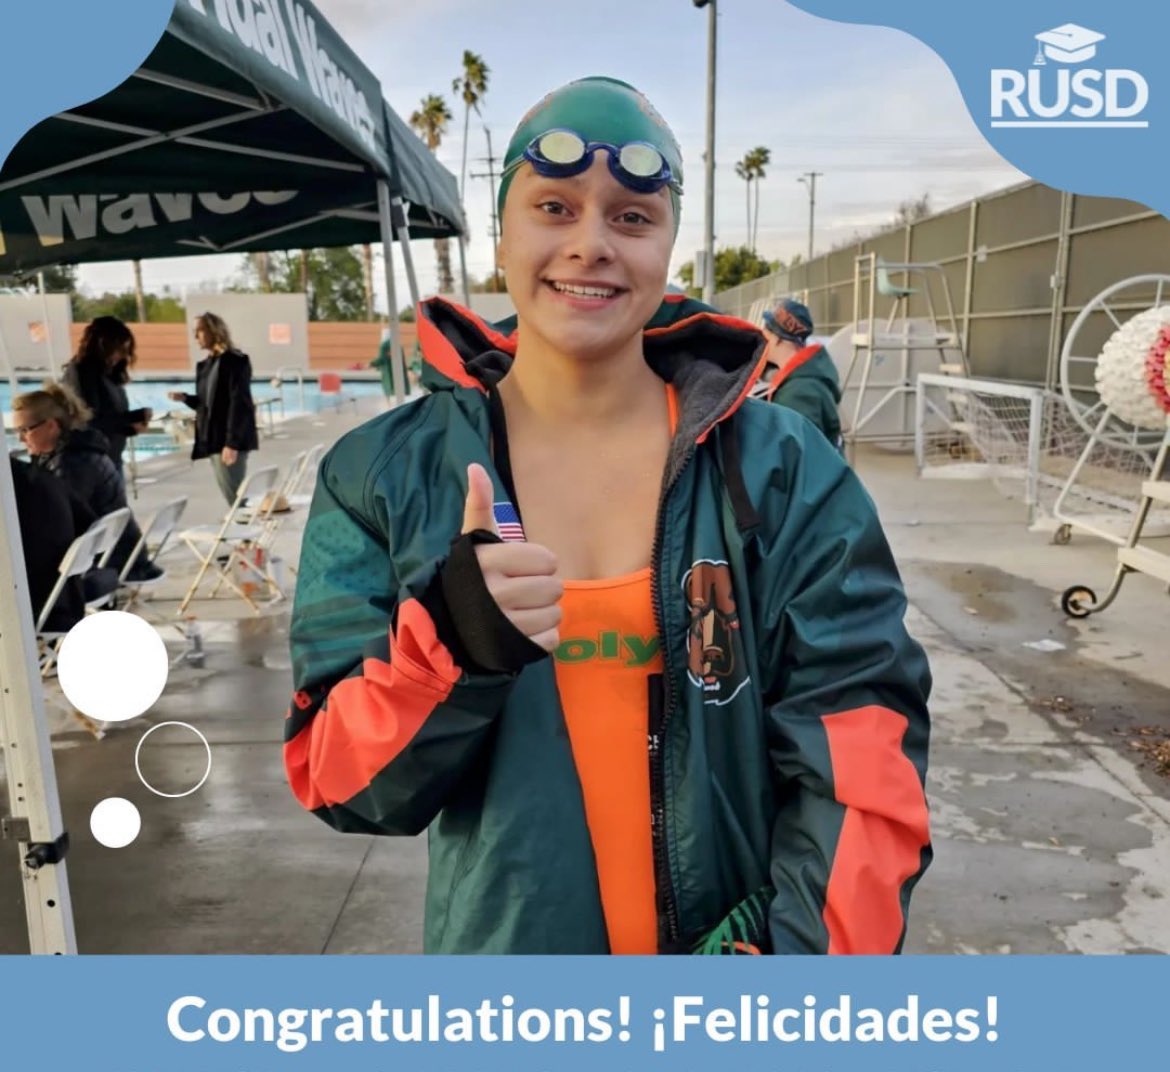 Congrats to @RiversidePolyHS sophomore Ava DeAnda who successfully defended her state swimming title in the 100-yard freestyle, setting a new state meet record, & brought home the title in the 200-yard freestyle this weekend at the CIF State swimming championship. Way to go Ava!